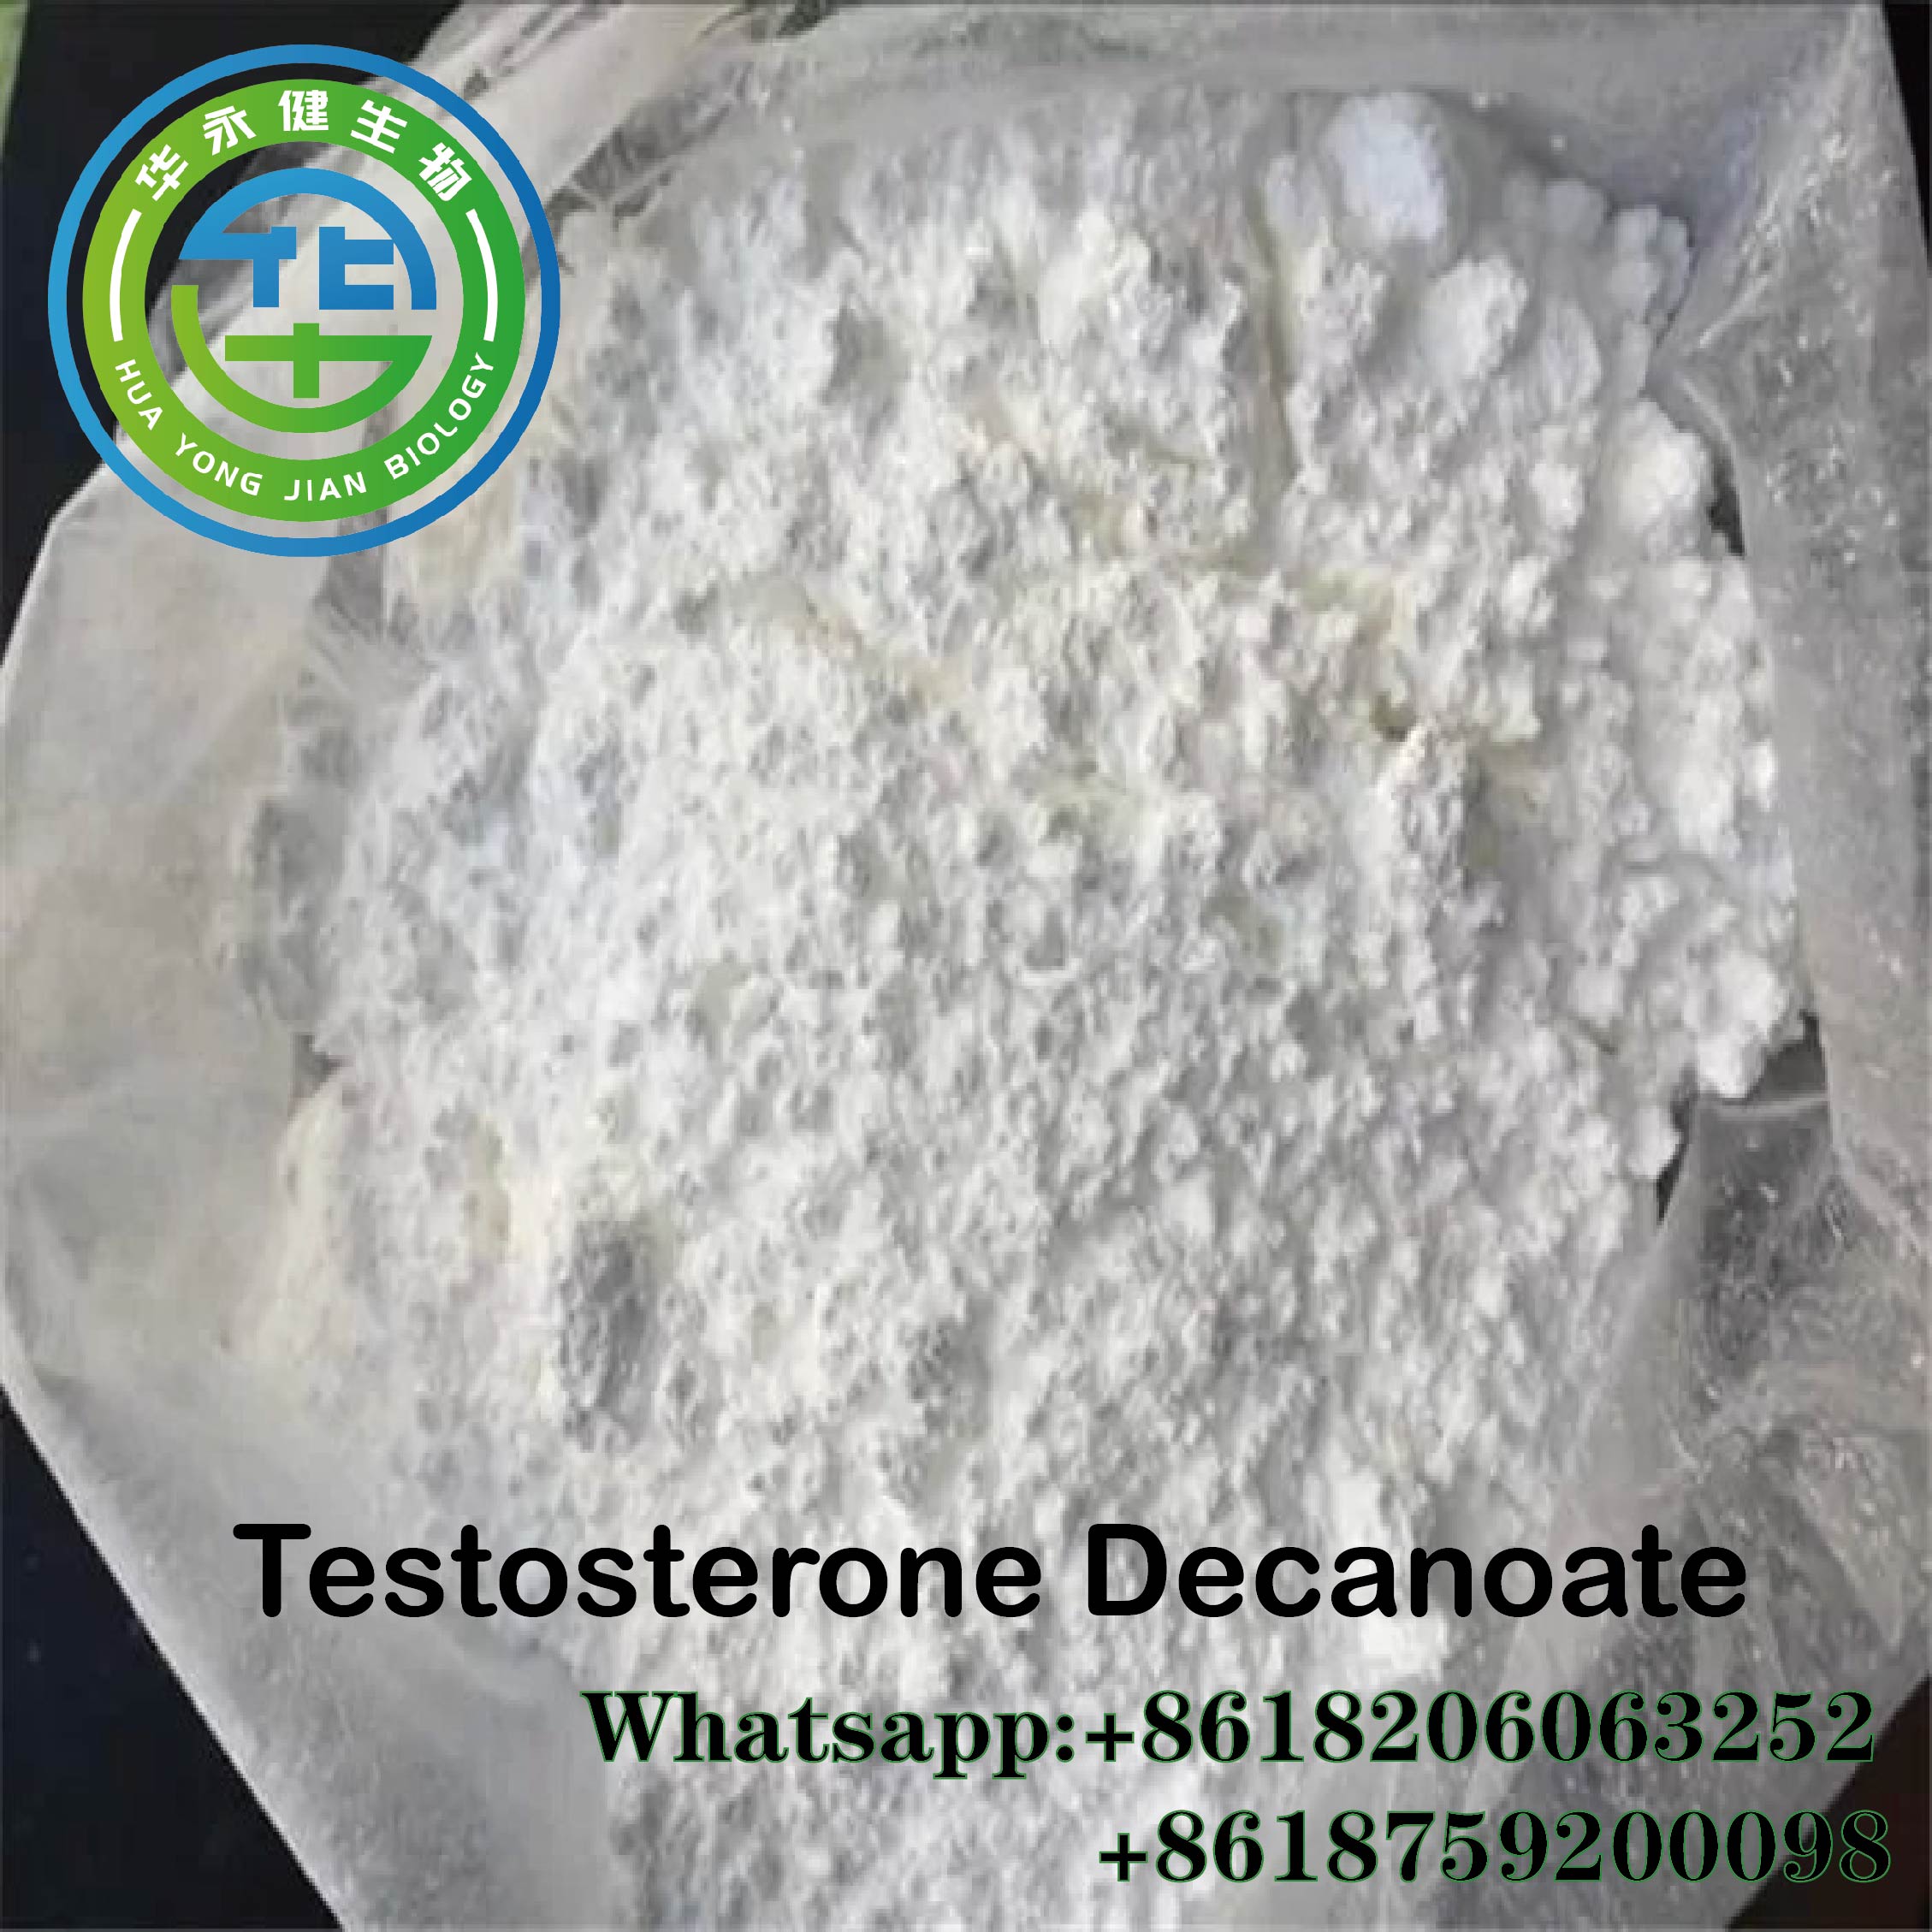 Testosterone Decanoate Powder Injection Liquid Semi - Finished Steroids Test Decanoate For Mass Gain CasNO.5721-91-5